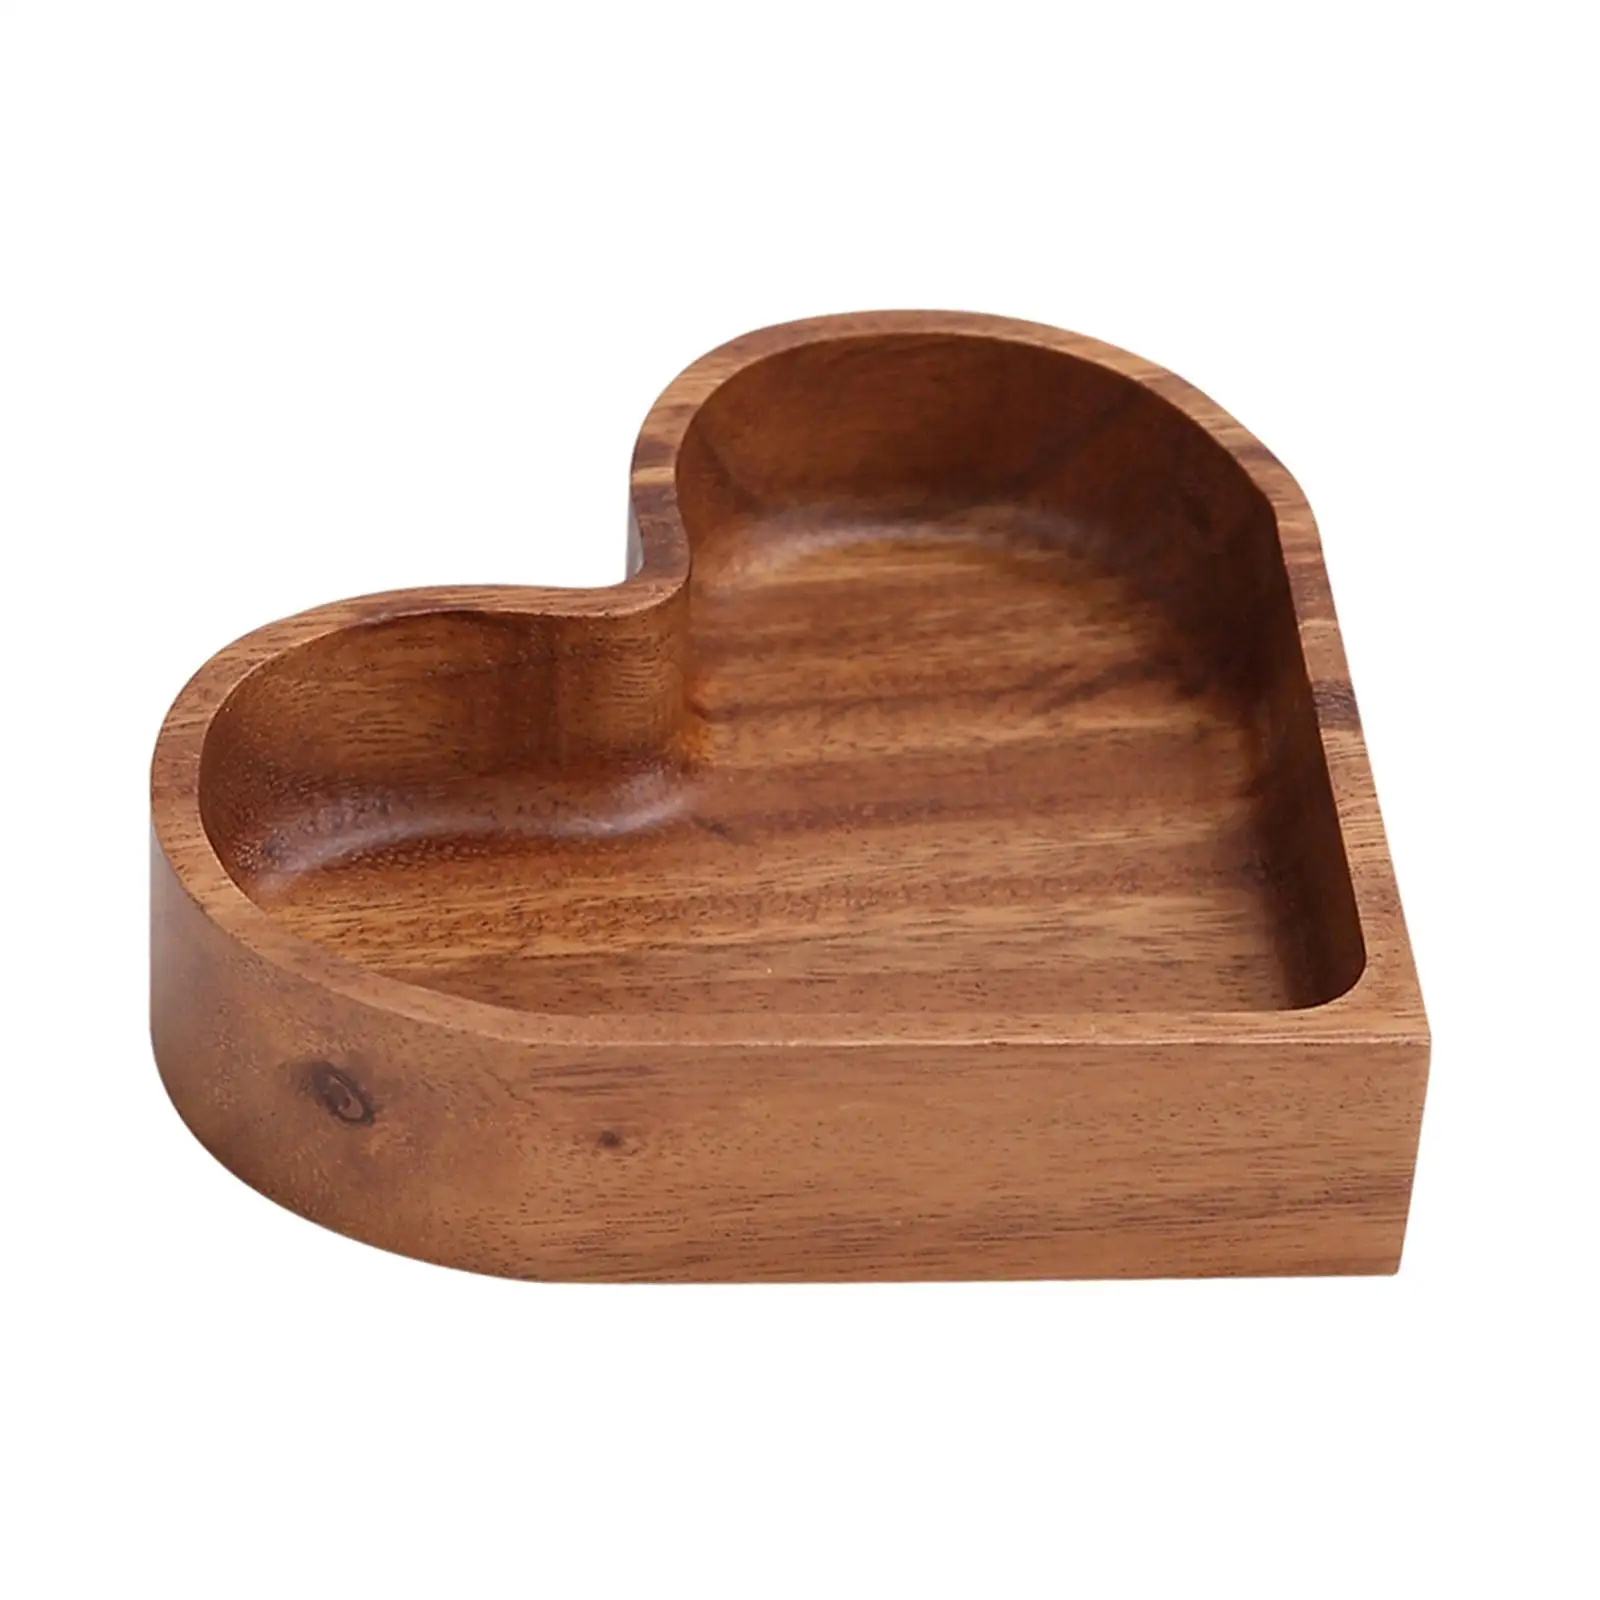 Wooden Serving Tray Versatile Farmhouse Decor for Bathroom, Outdoors Breakfast Tray Heart Shaped Plate Unique Heart Shaped Tray